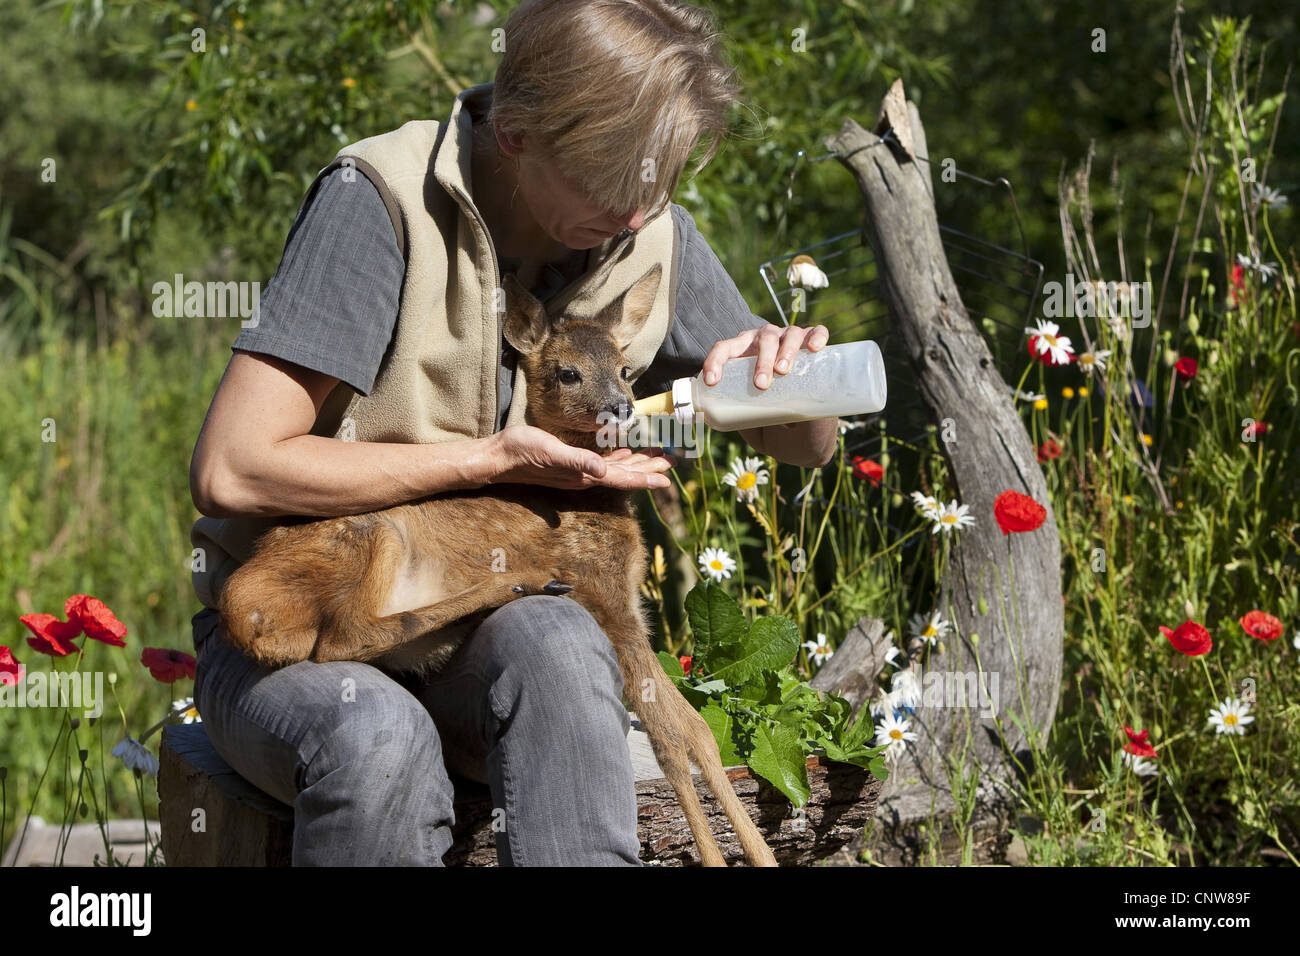 roe deer (Capreolus capreolus), a few days old orphaned fawn being fed with surrogate milk from a bottle by a woman, Germany Stock Photo